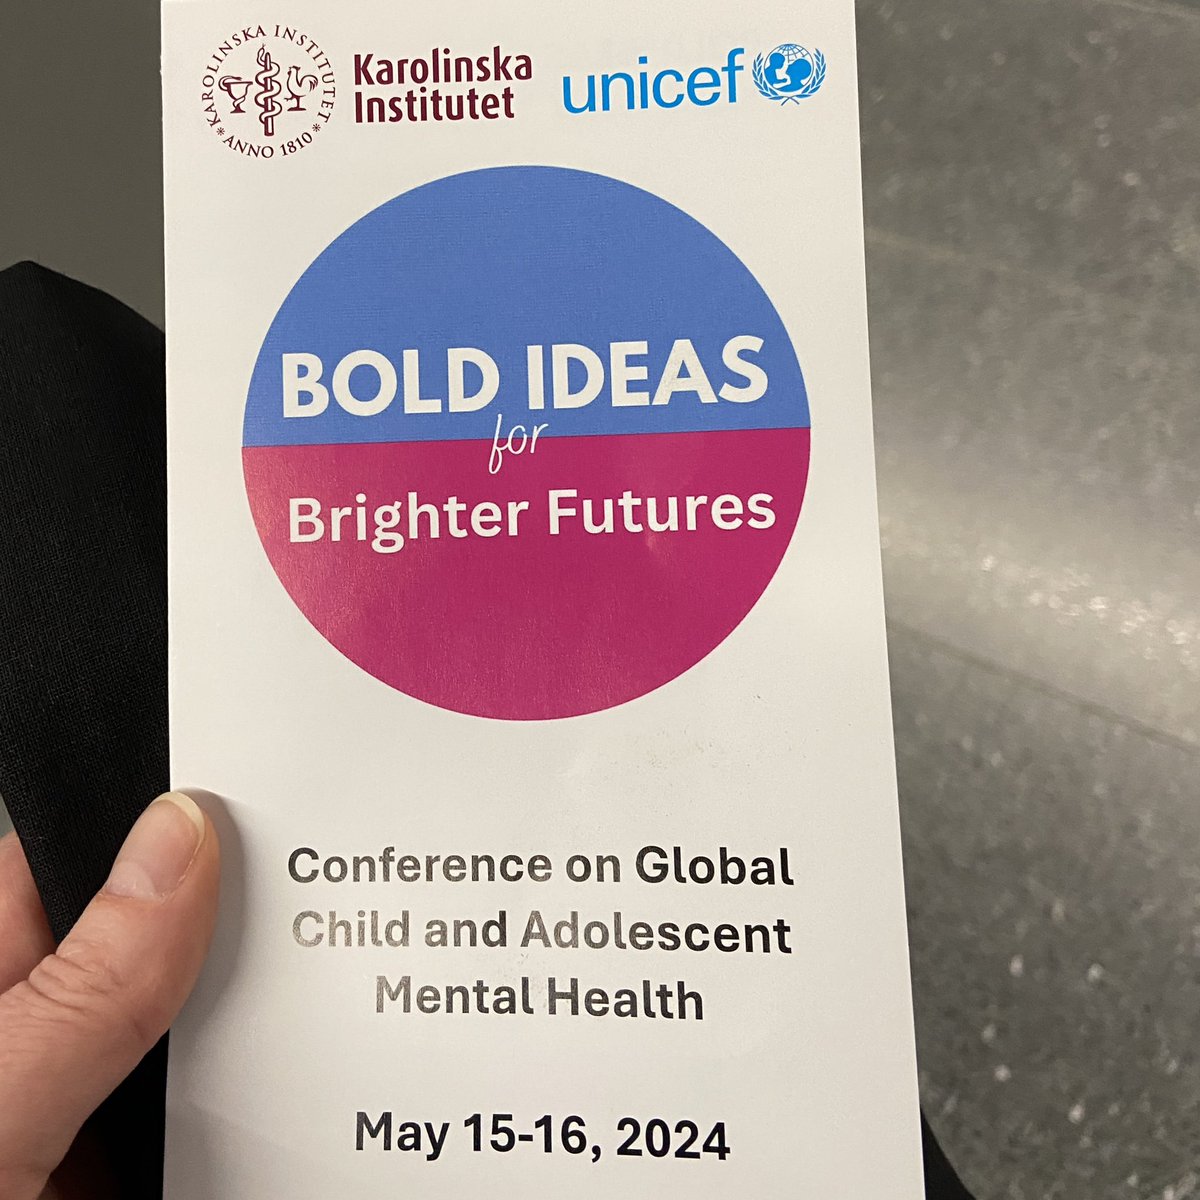 In Stockholm for ‘Bold Ideas for Brighter Futures’, co-sponsored by @UNICEF and @karolinskainst. Inspiring conversations and research from so many fields and cultures.